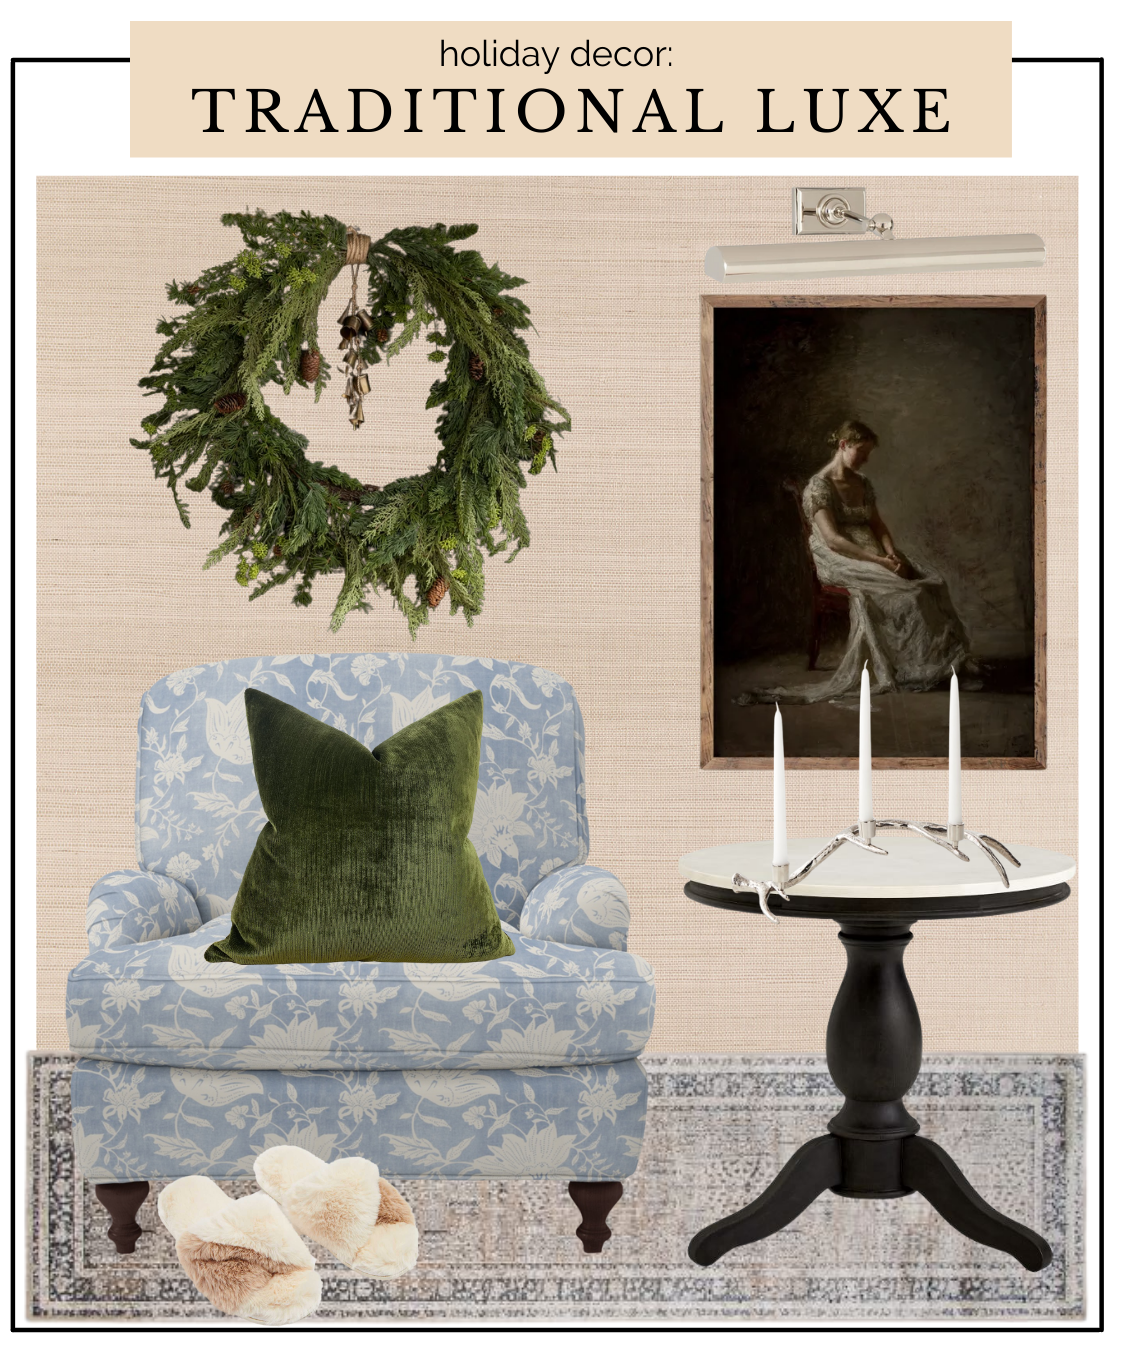 traditional luxe decor, traditional christmas decor ideas, traditional luxury decorating